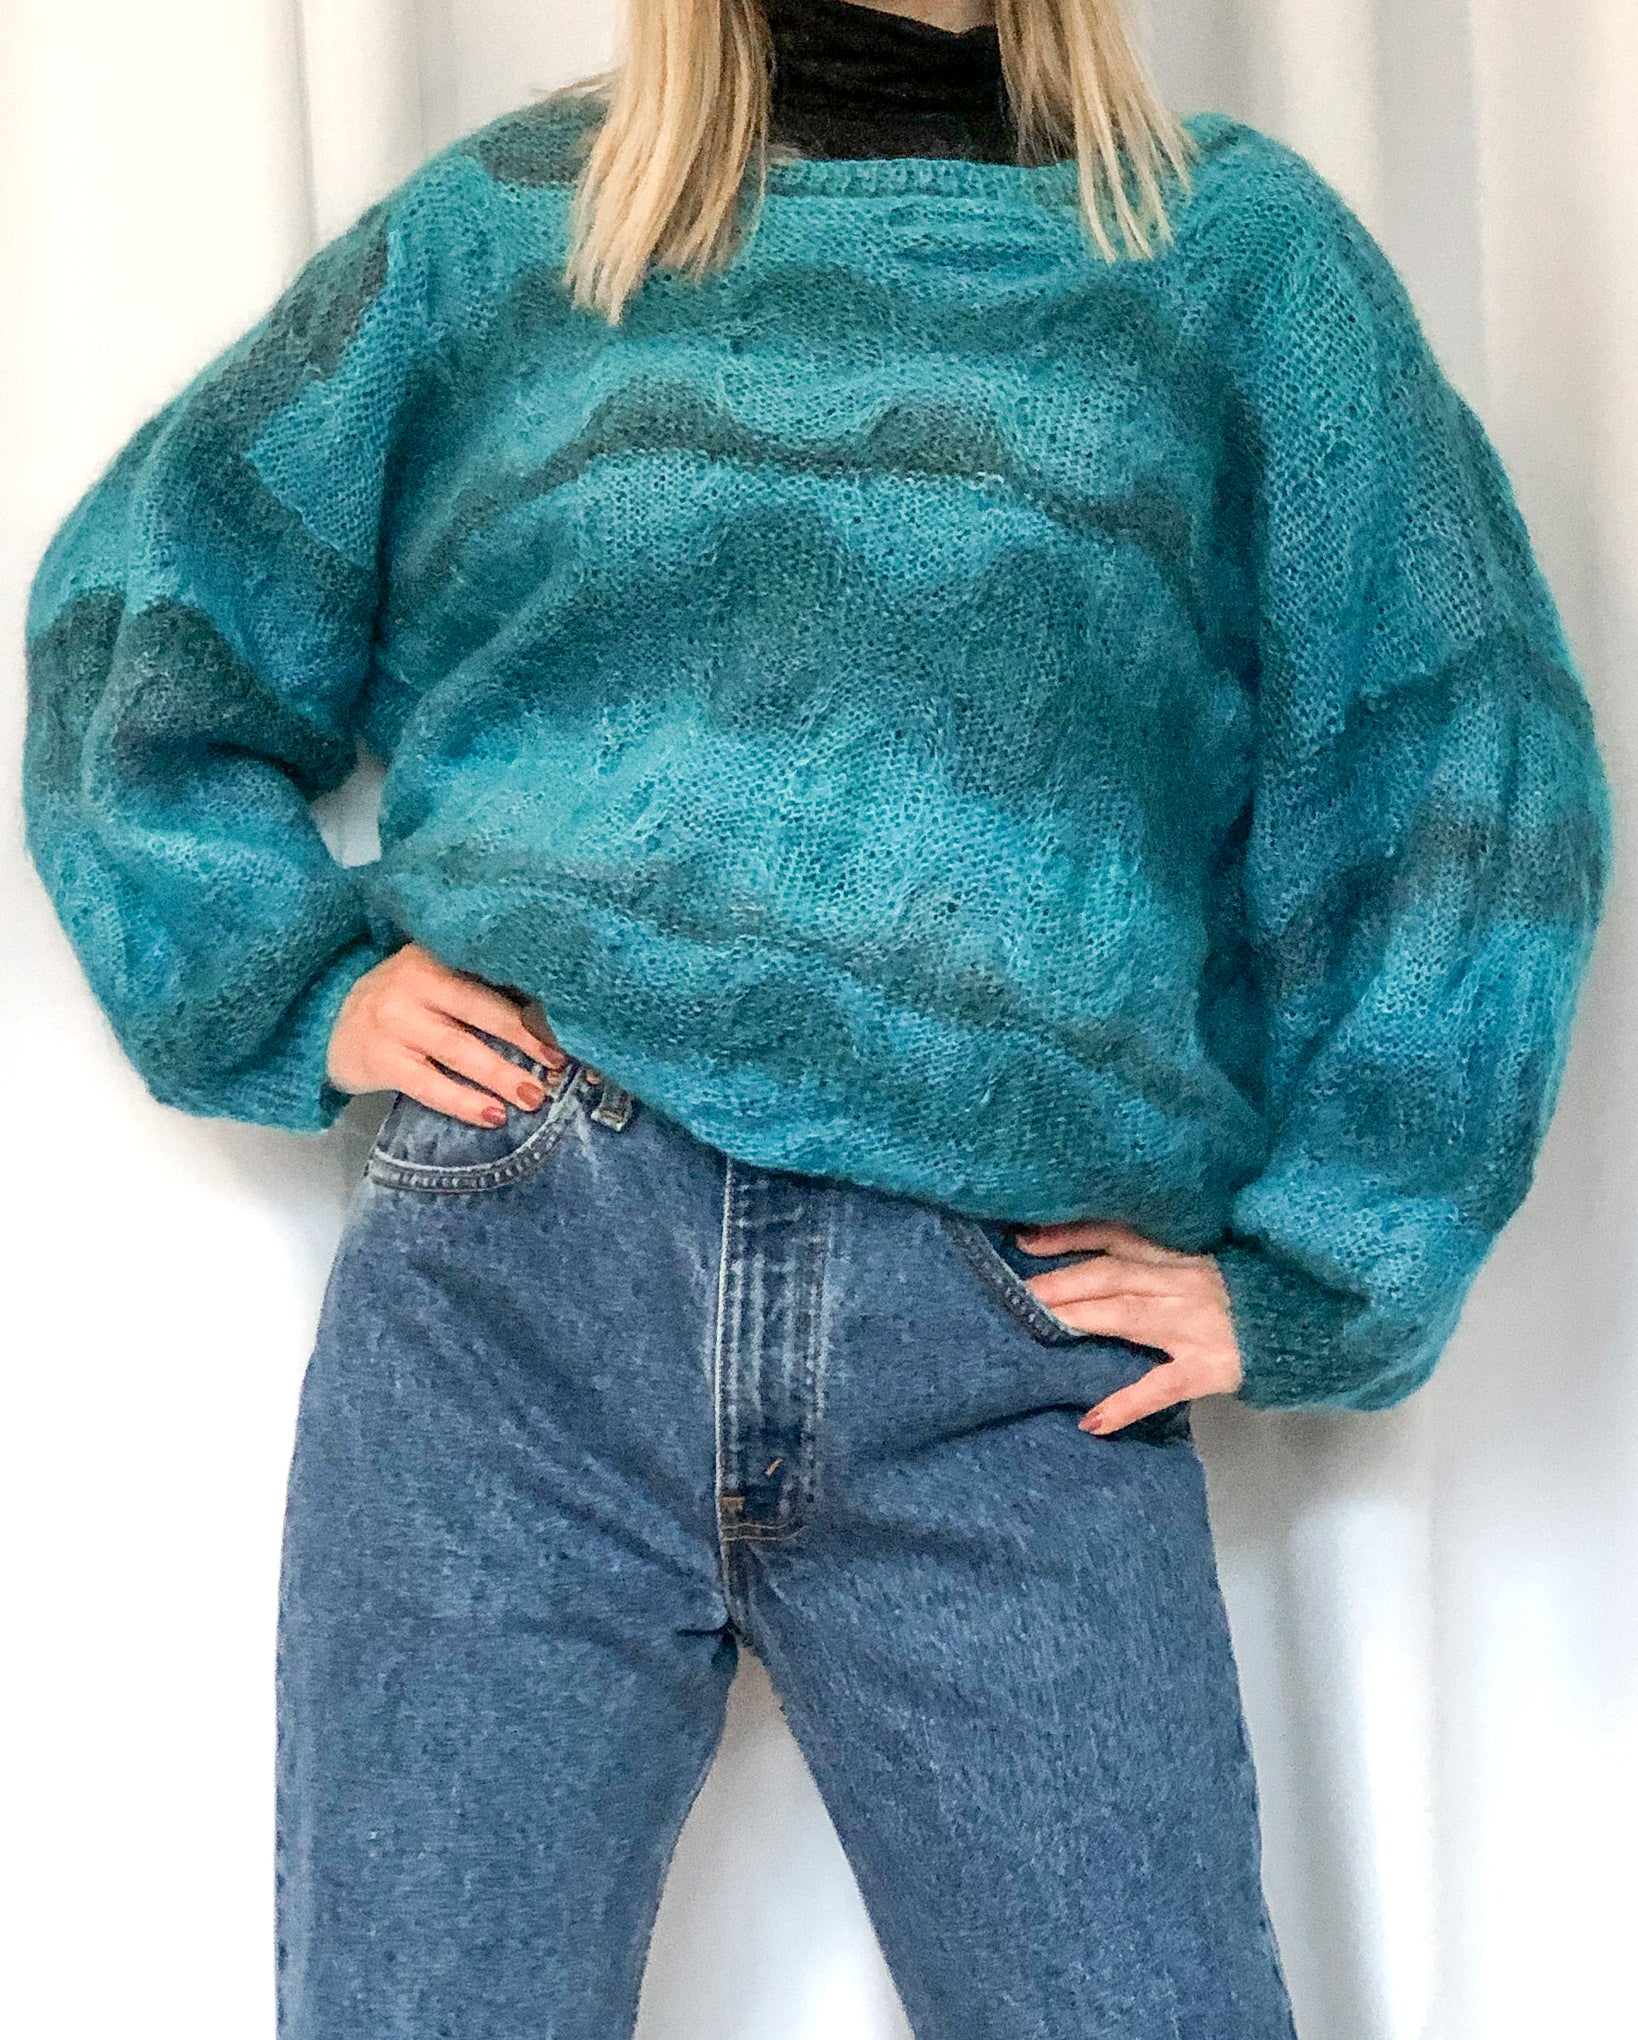 Hand Knit Blue Wool Sweater with Unique Knit Design, Loose Knit with Puffy Sleeves